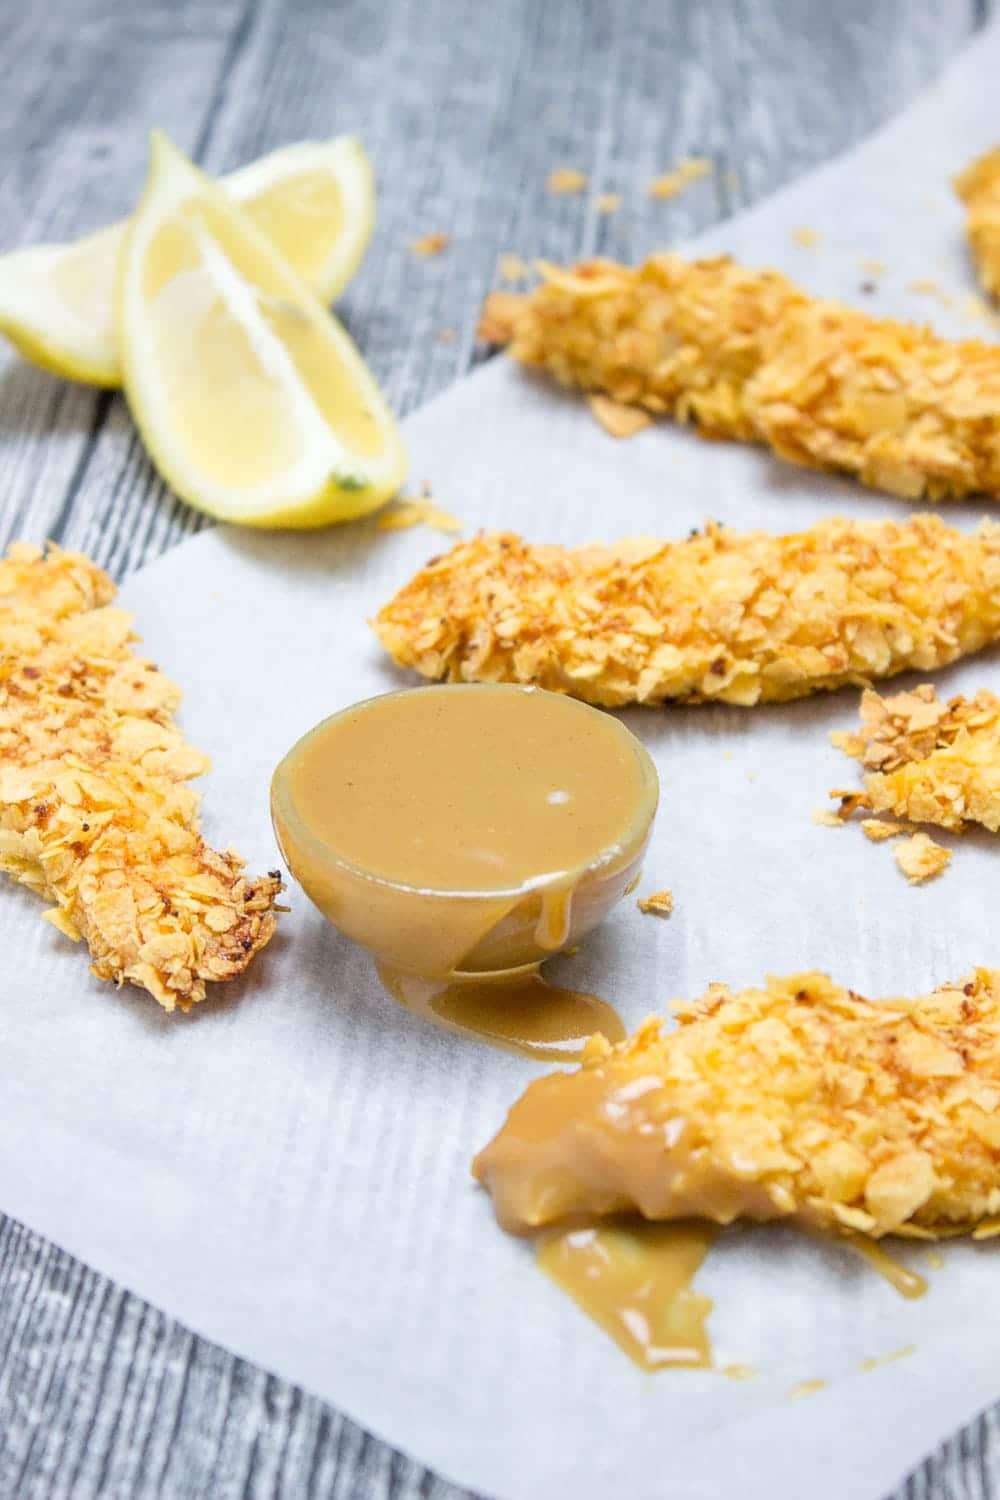 Crispy Baked Cornflake Chicken Tenders made without added fat are the perfect low-calorie, quick and HEALTHY family meal. Served with homemade Honey Dijon Sauce, these tenders are delicious gameday finger food too. CLICK to read more or PIN for later! 